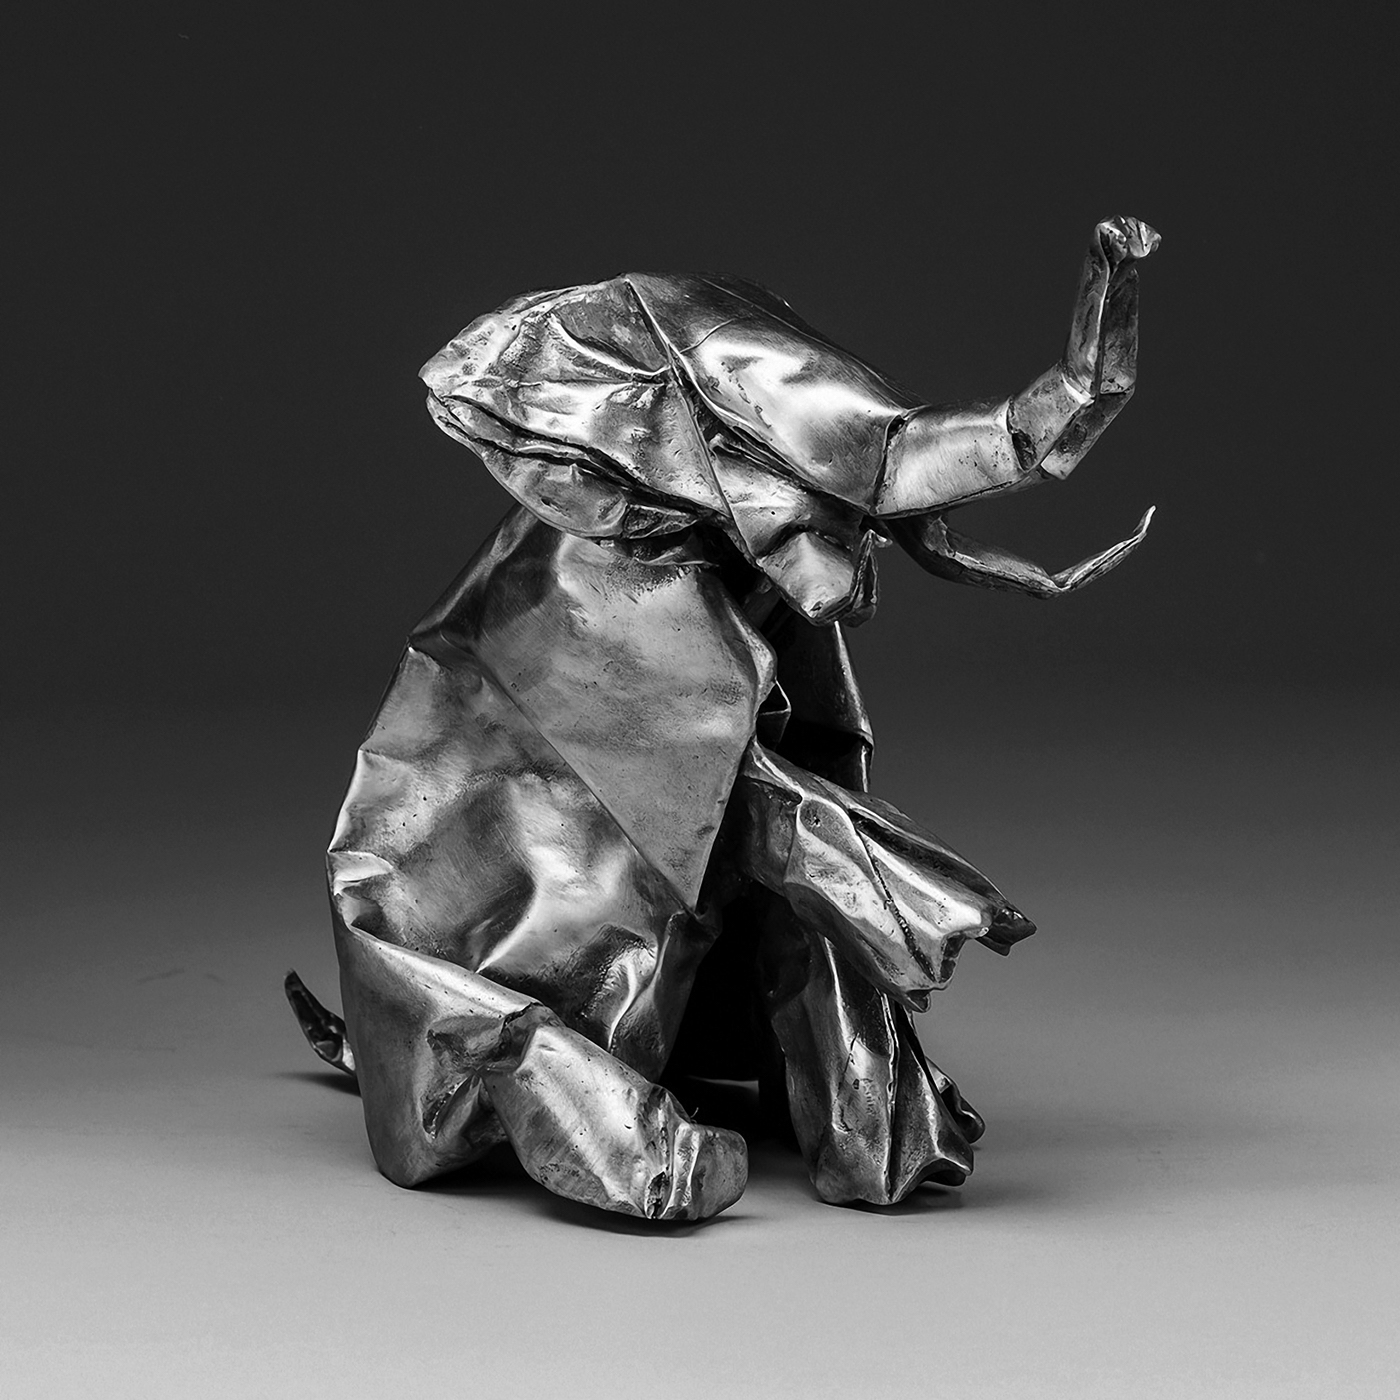 Jlin Announces New Album <i>Black Origami</i>, Featuring William Basinski and Holly Herndon Collaborations” title=”Jlin_BlackOrigami_cover-1489512034″ data-original-id=”230861″ data-adjusted-id=”230861″ class=”sm_size_full_width sm_alignment_center ” /></p><div class=